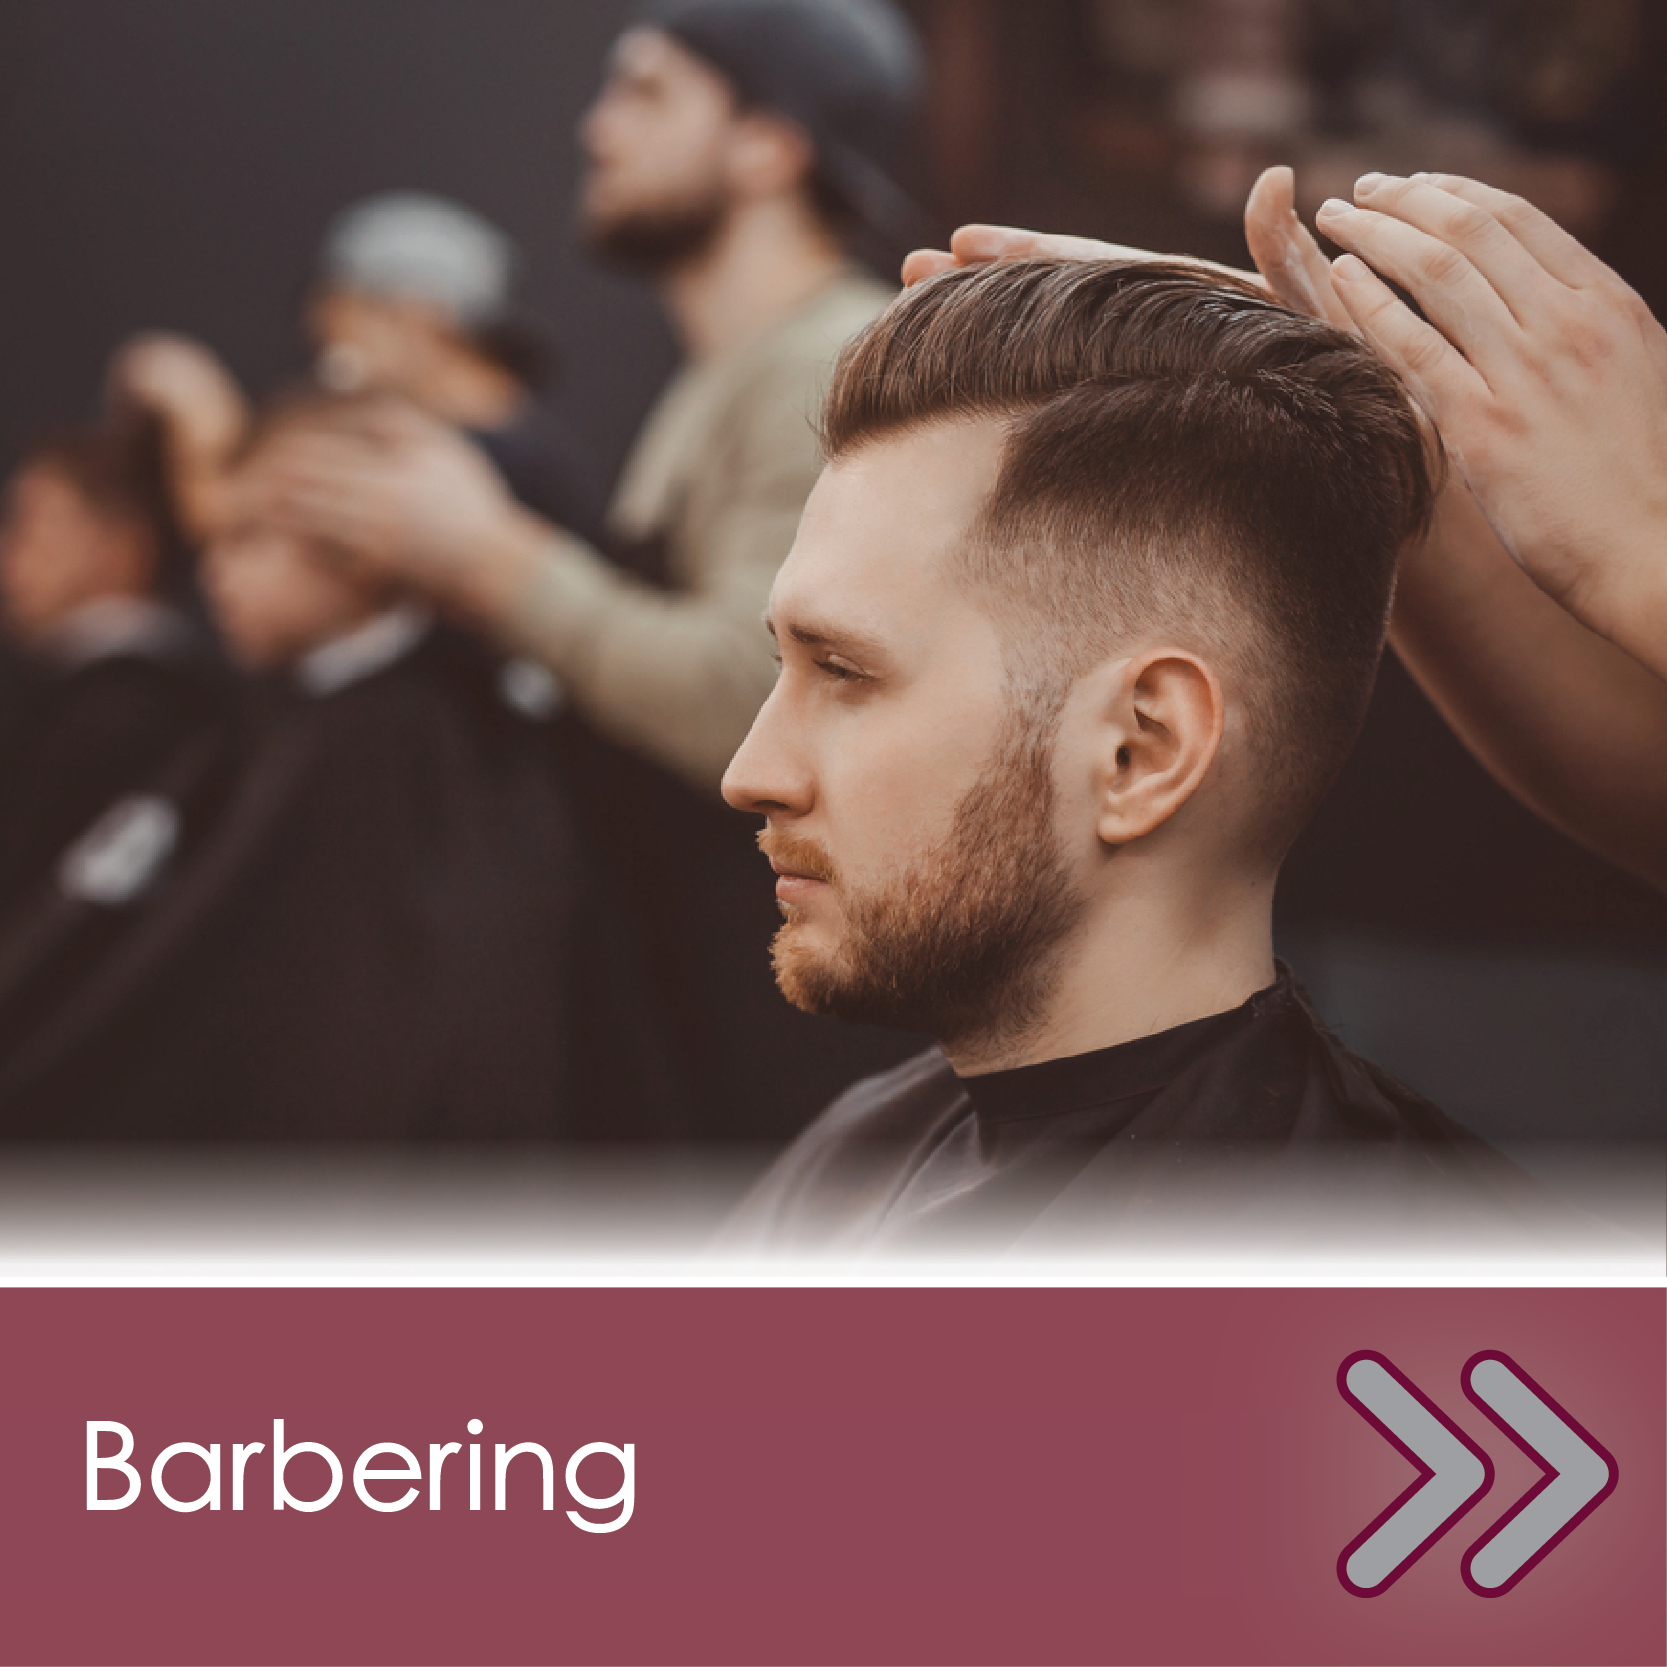 DCMO BOCES Adult Barbering